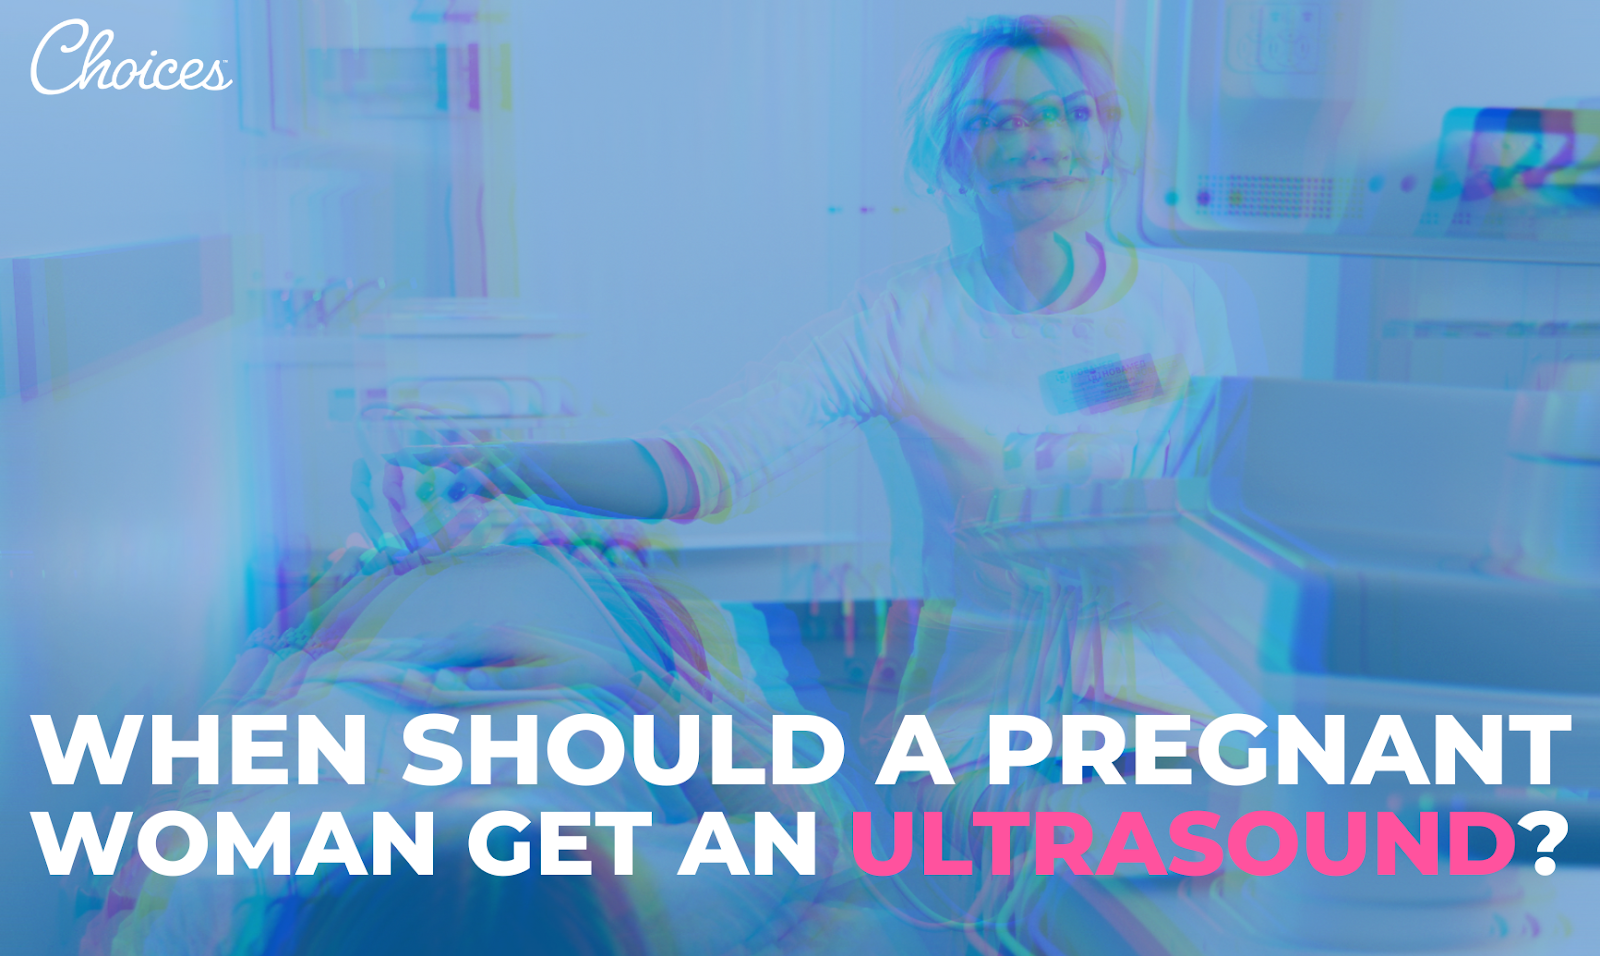 When Should a Pregnant Woman Get an Ultrasound?